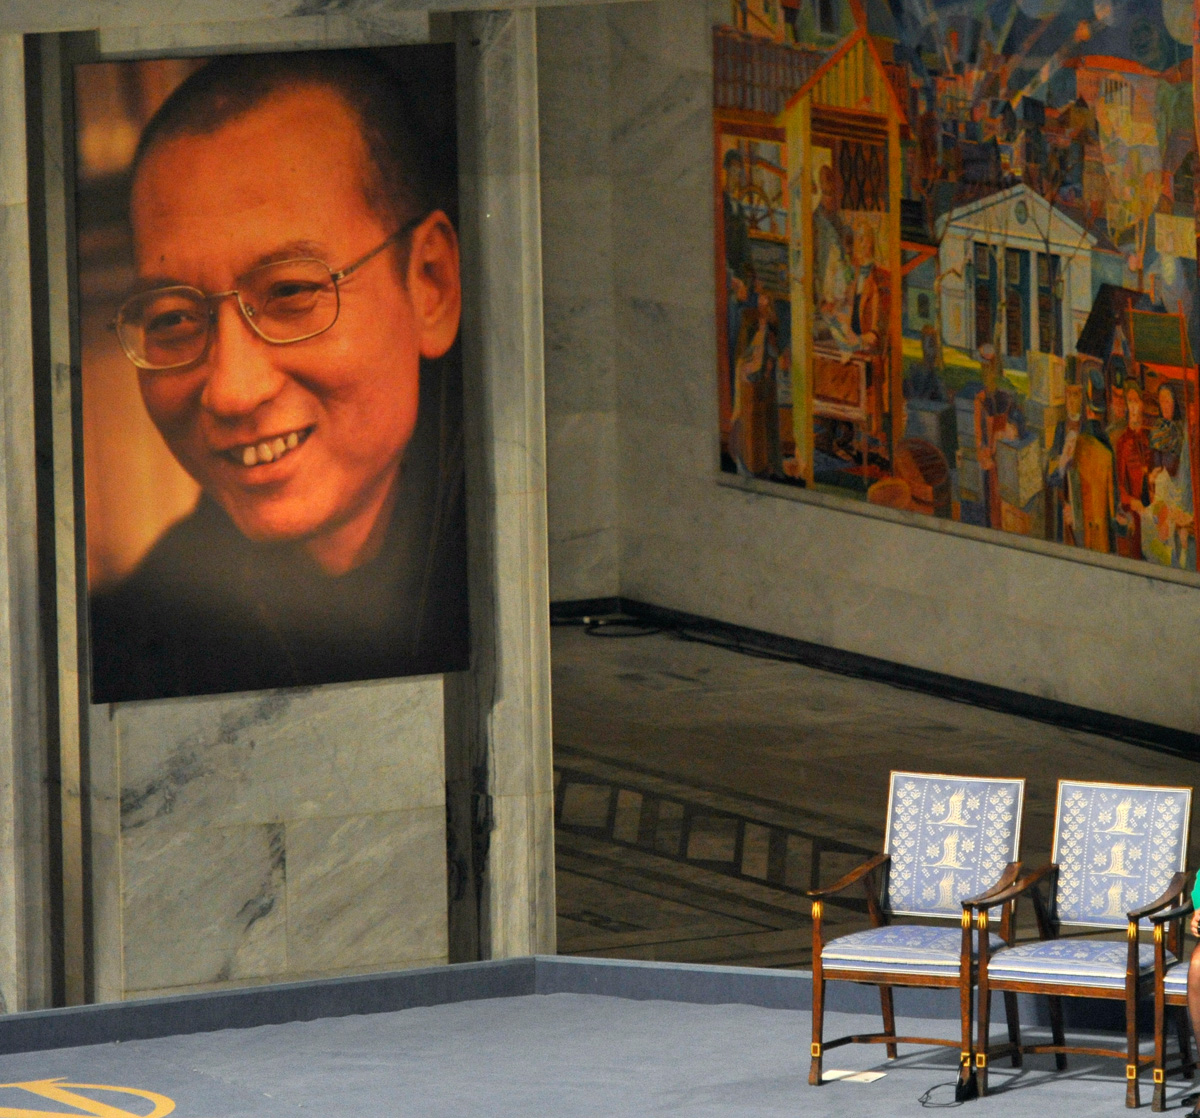 China is the only country in the world with a Nobel Peace Prize winner in prison. Liu Xiaobo, pictured above, missed the 2010 ceremony in Oslo, Norway